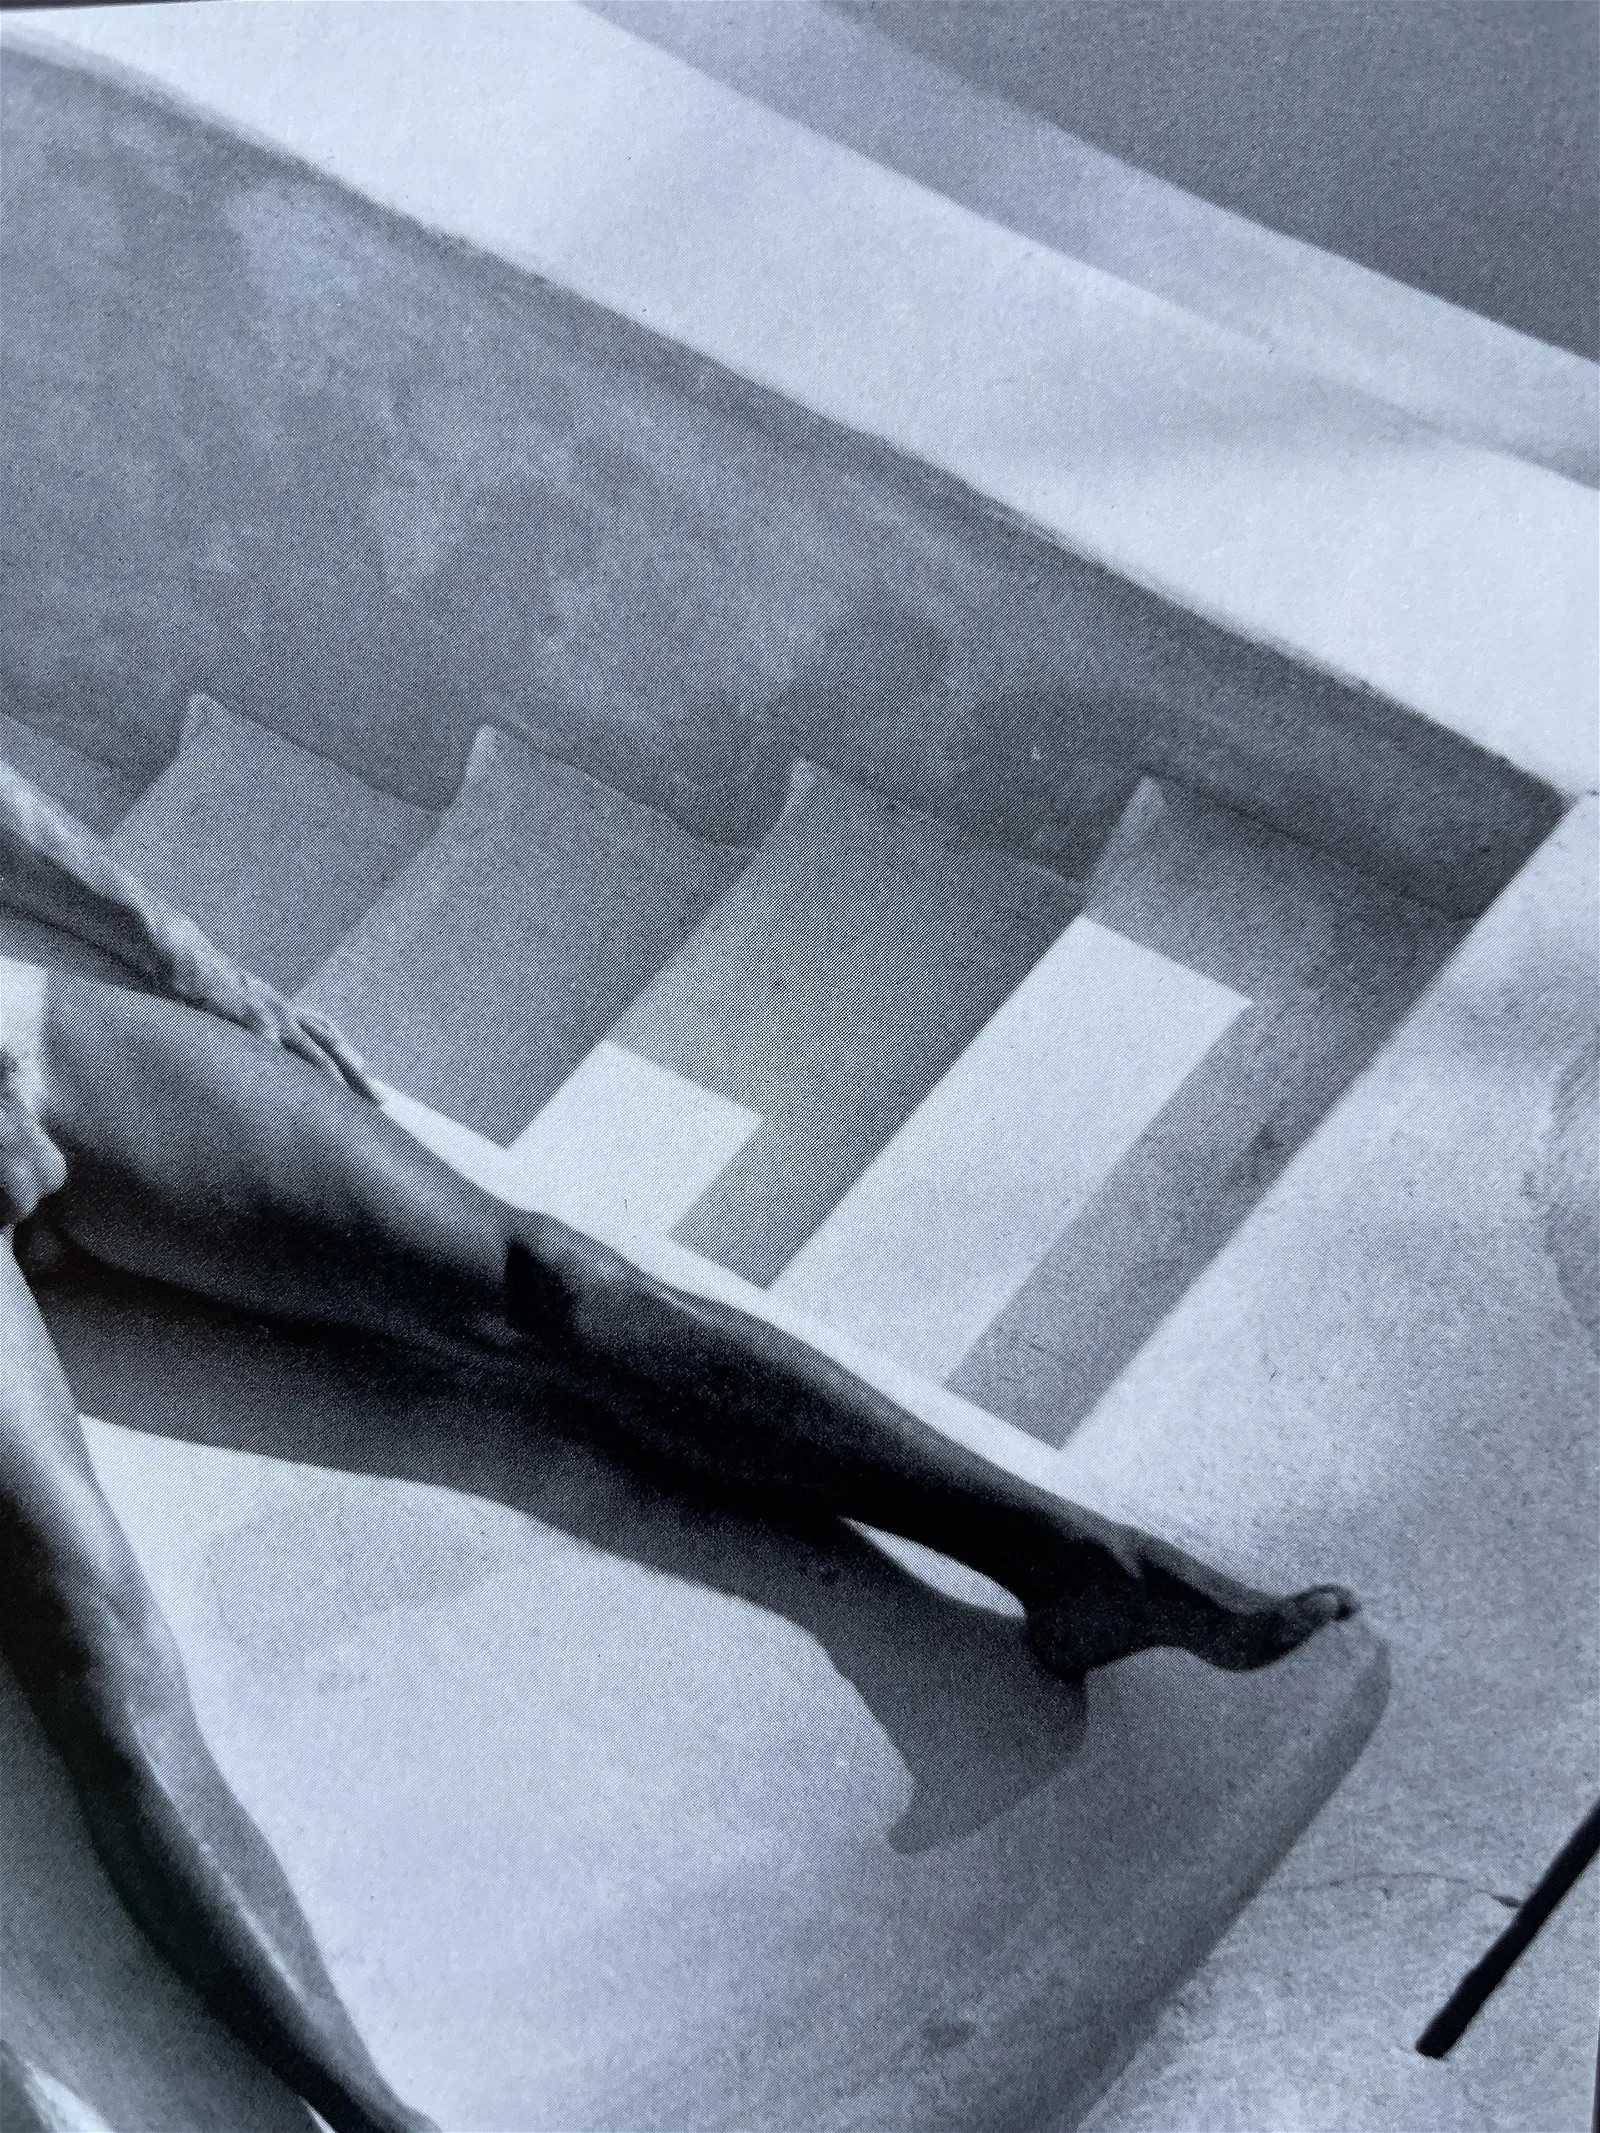 Tom Bianchi "Male Nude, Stairway" Print - Image 2 of 6